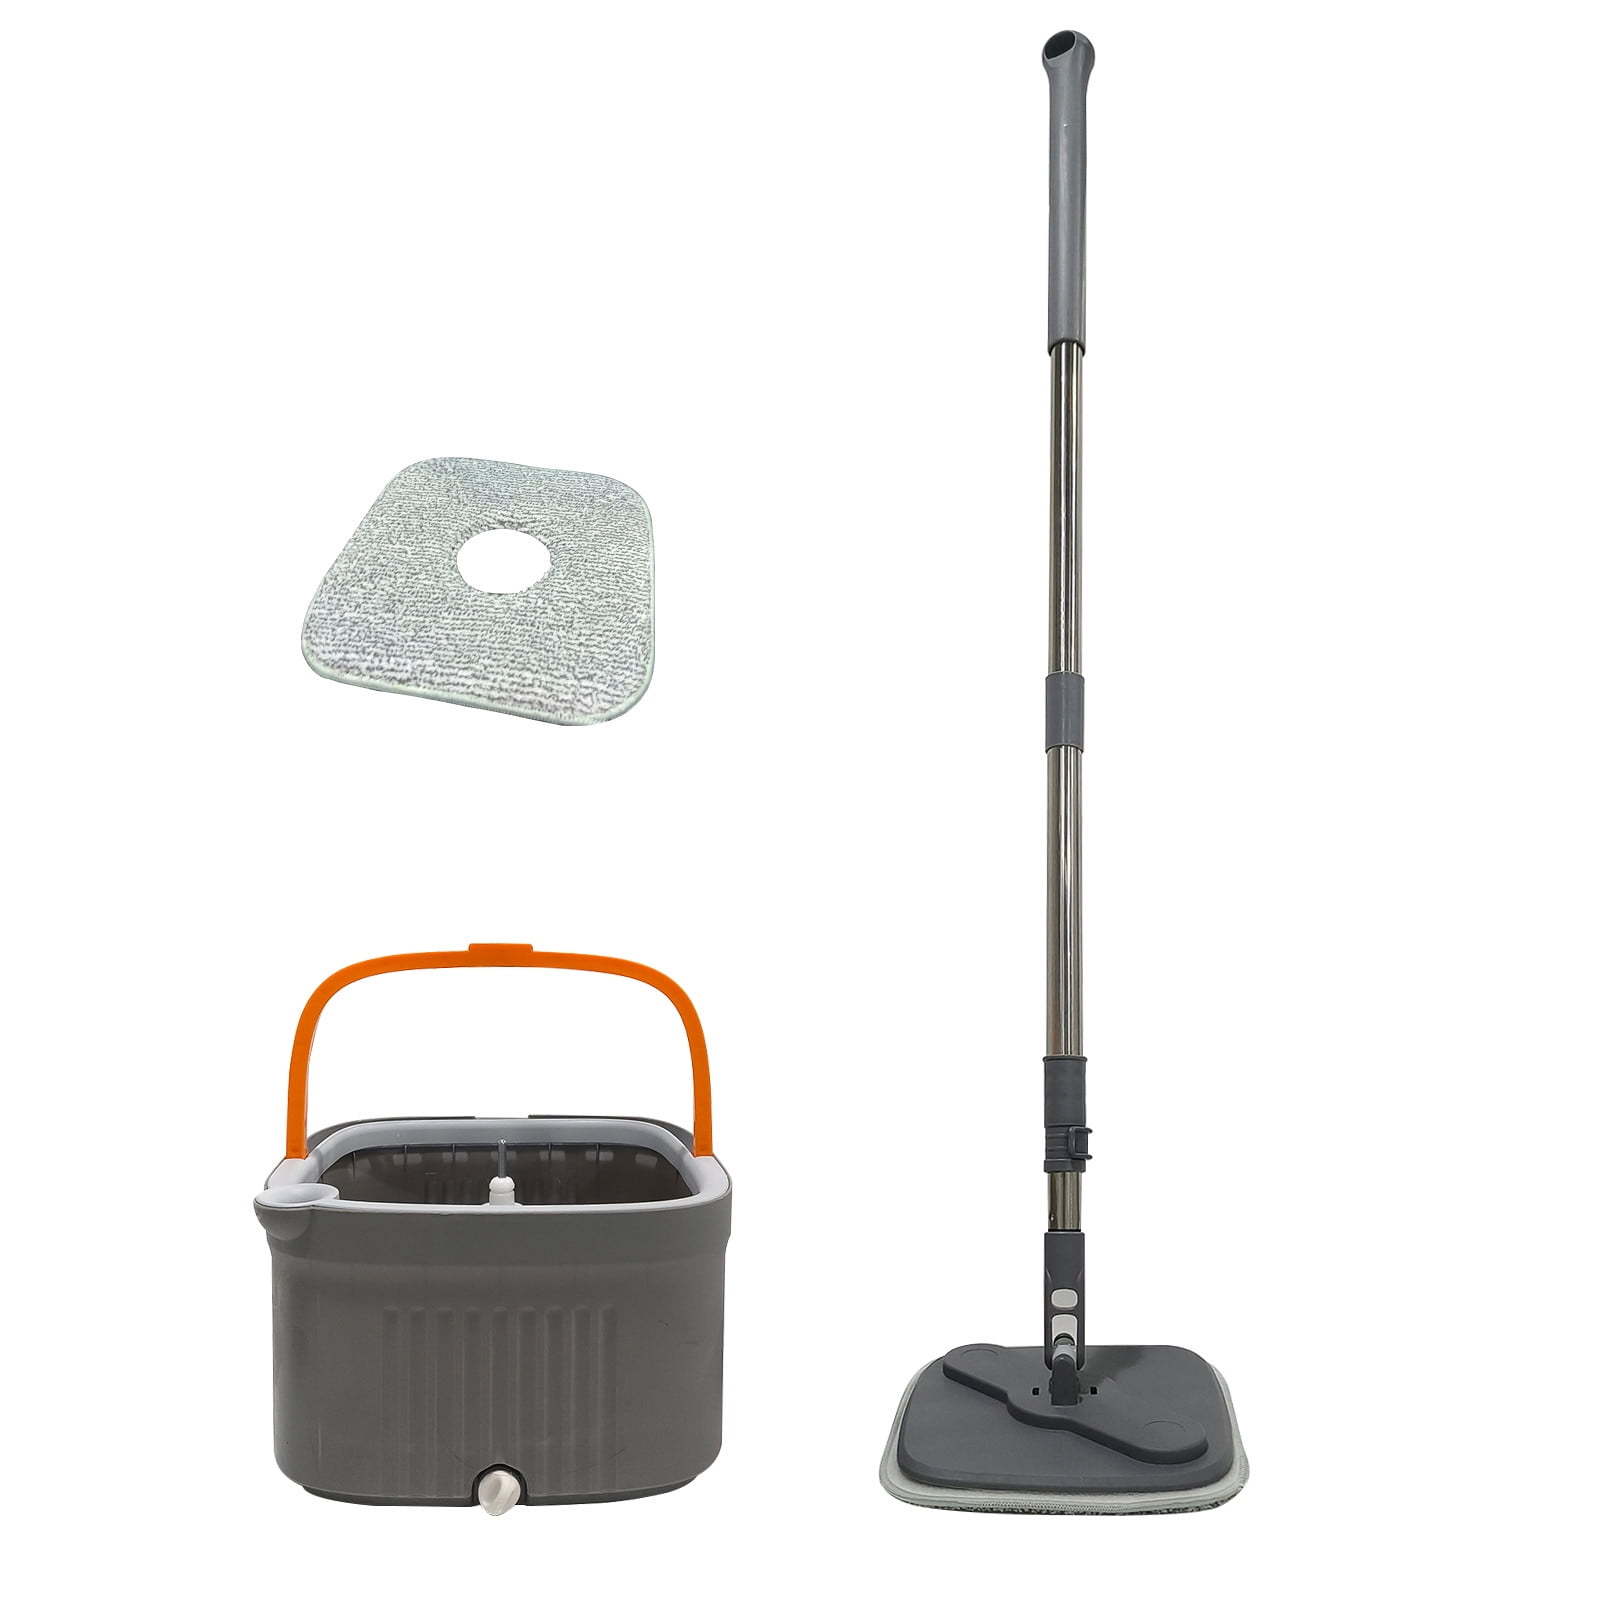 Portable Folding Mop Bucket,Collapsible Mop Water Bucket with Wheels 18L  (4.5 Gallon),Foldable Buckets with Handles for Household Cleaning Use